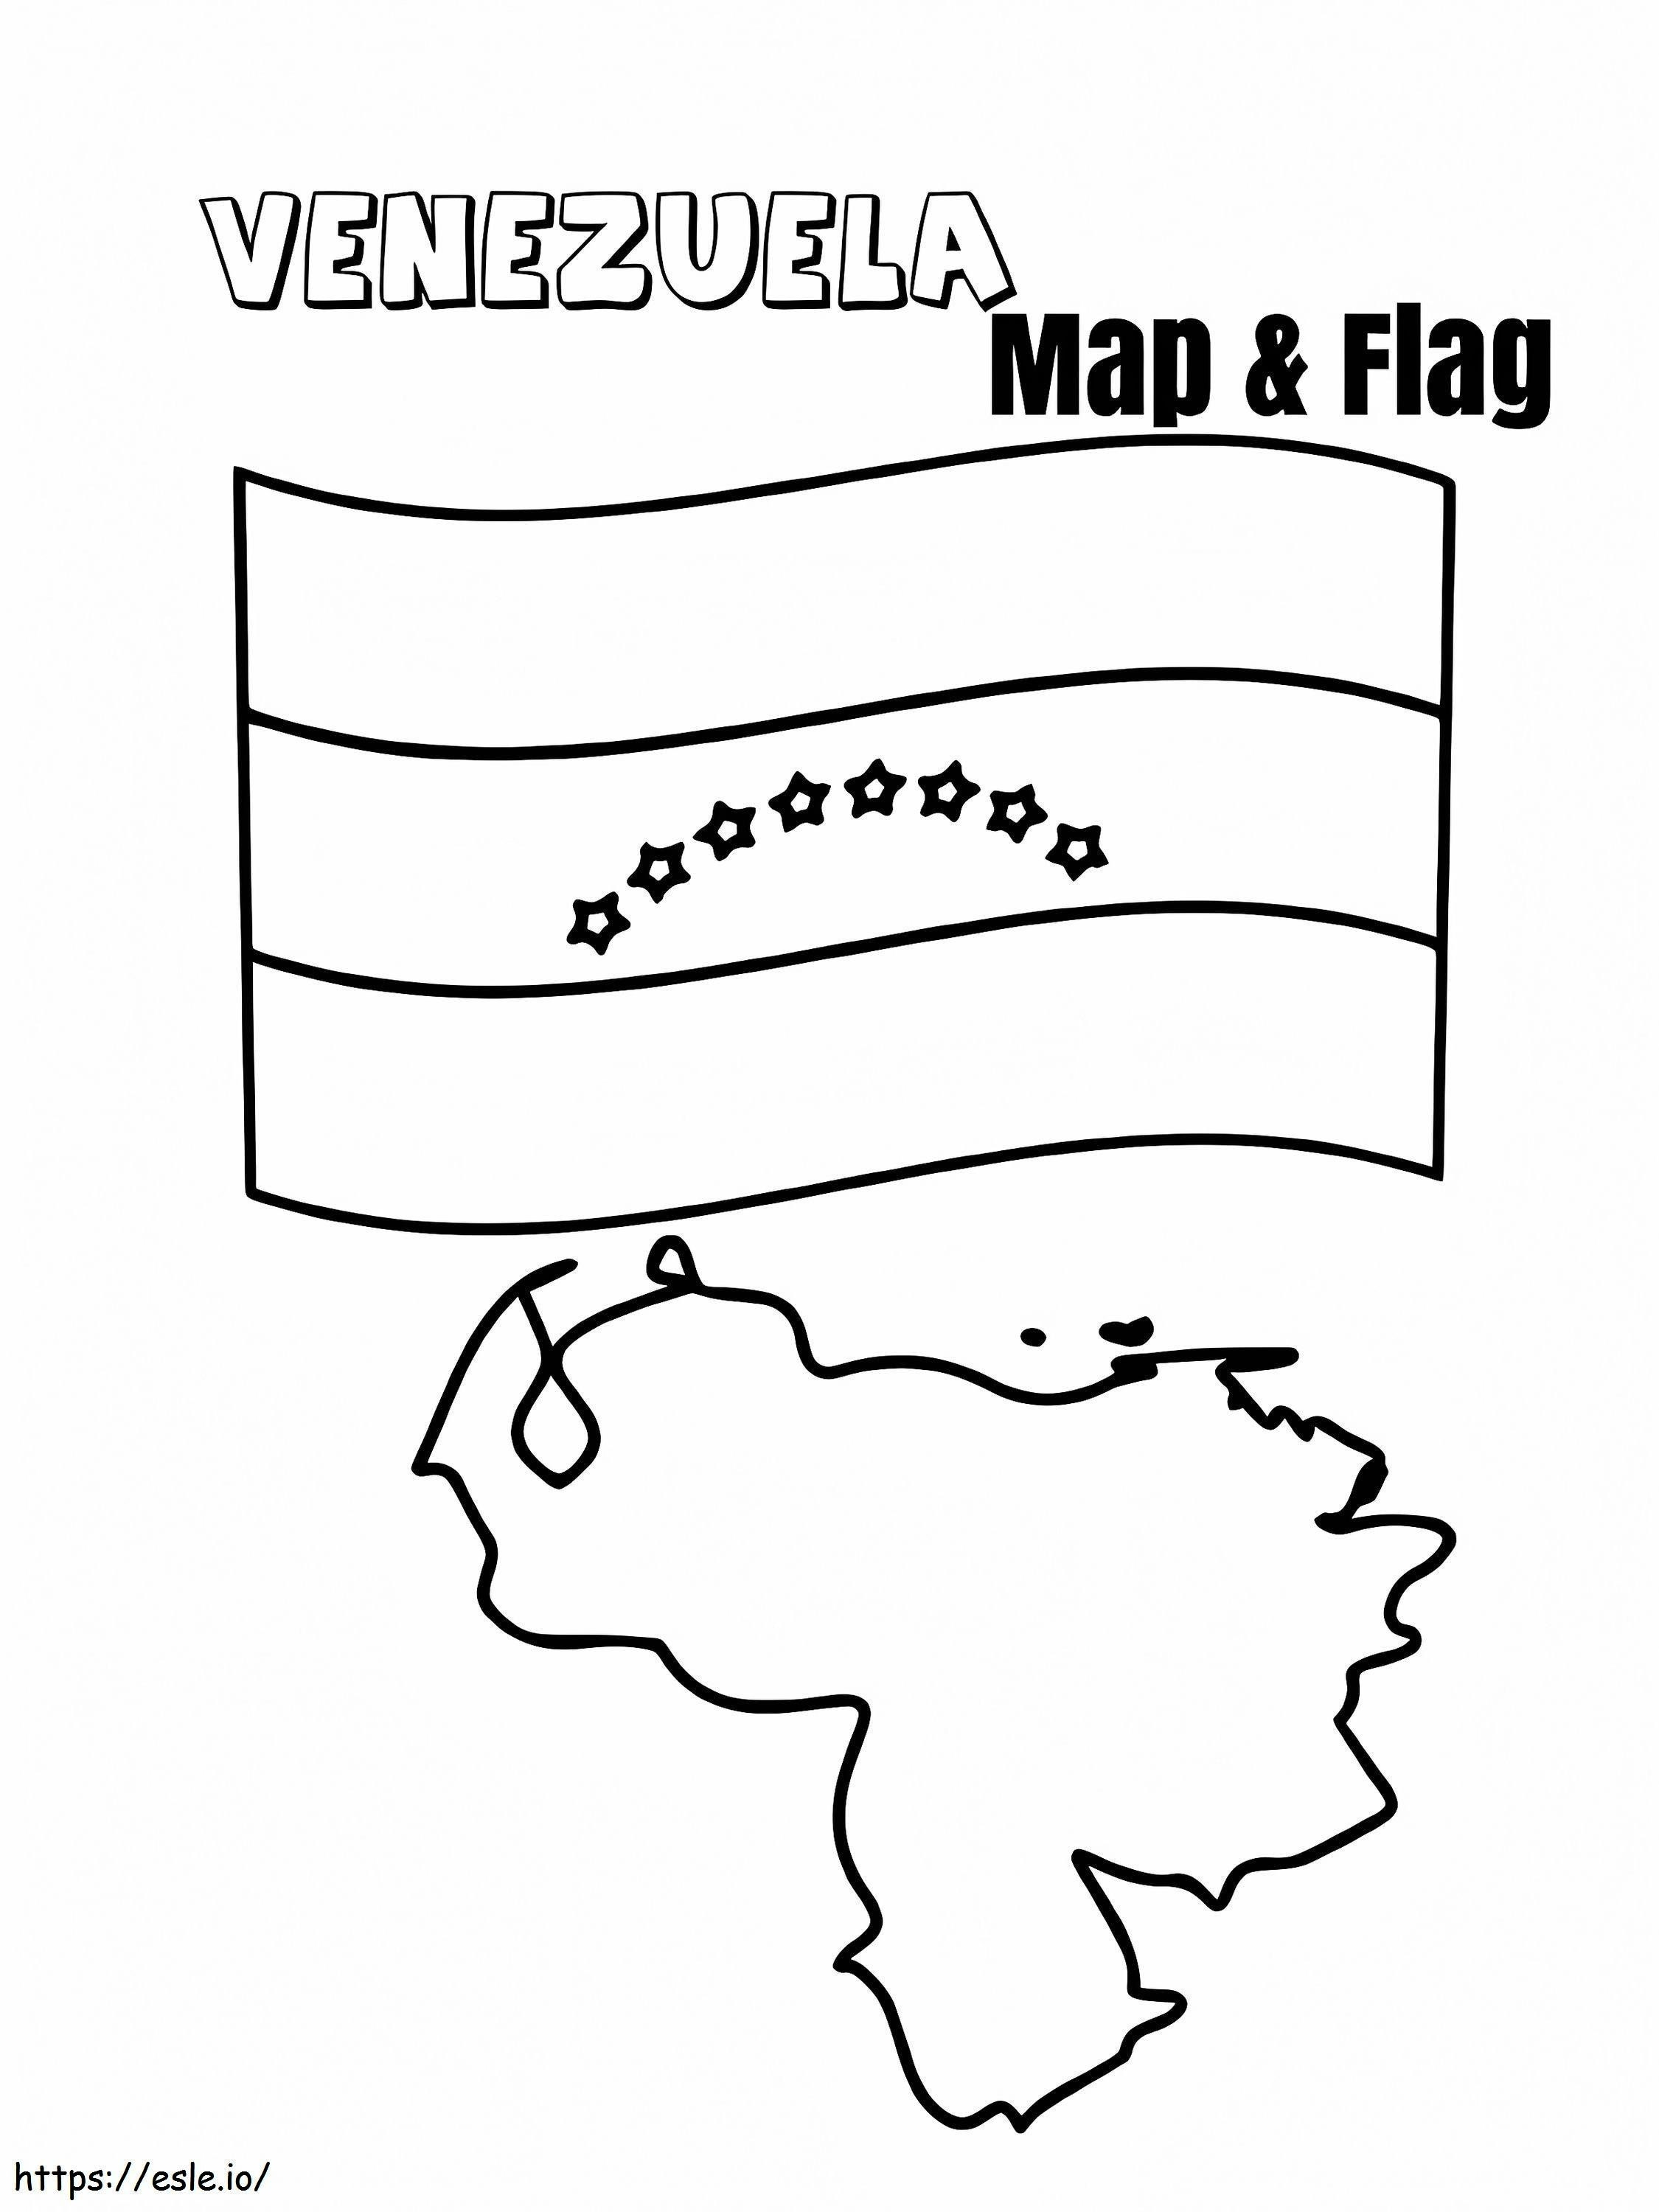 Venezuela Map And Flag coloring page